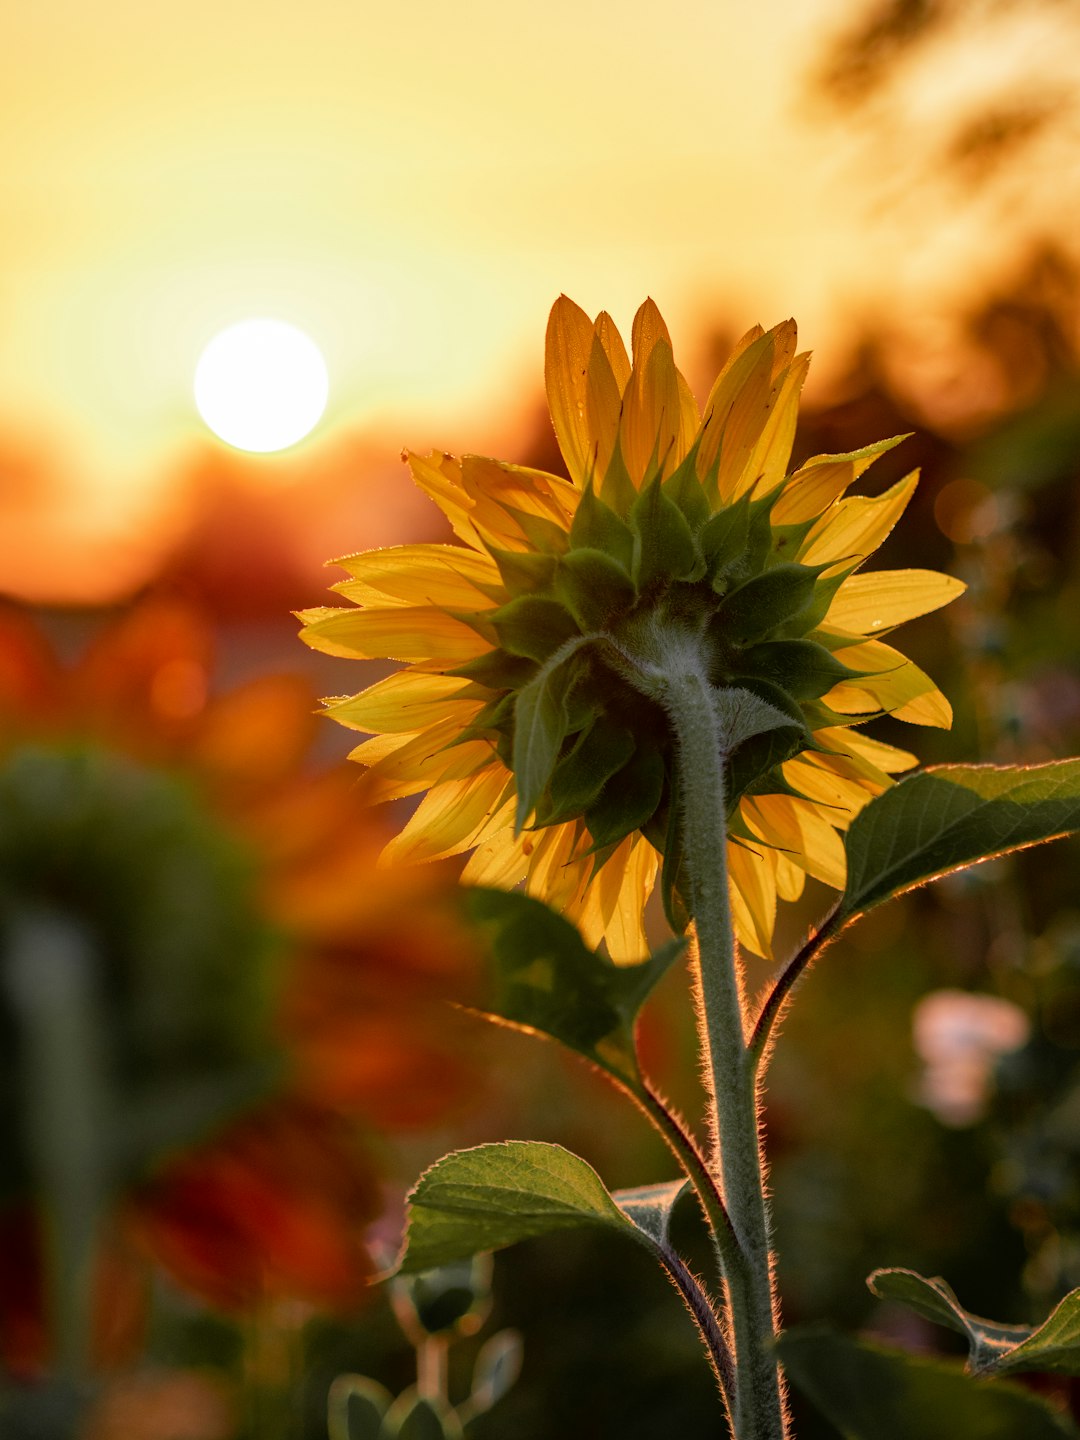 Sunflowers bioaccumulate radiation from nearby nuclear power plants.